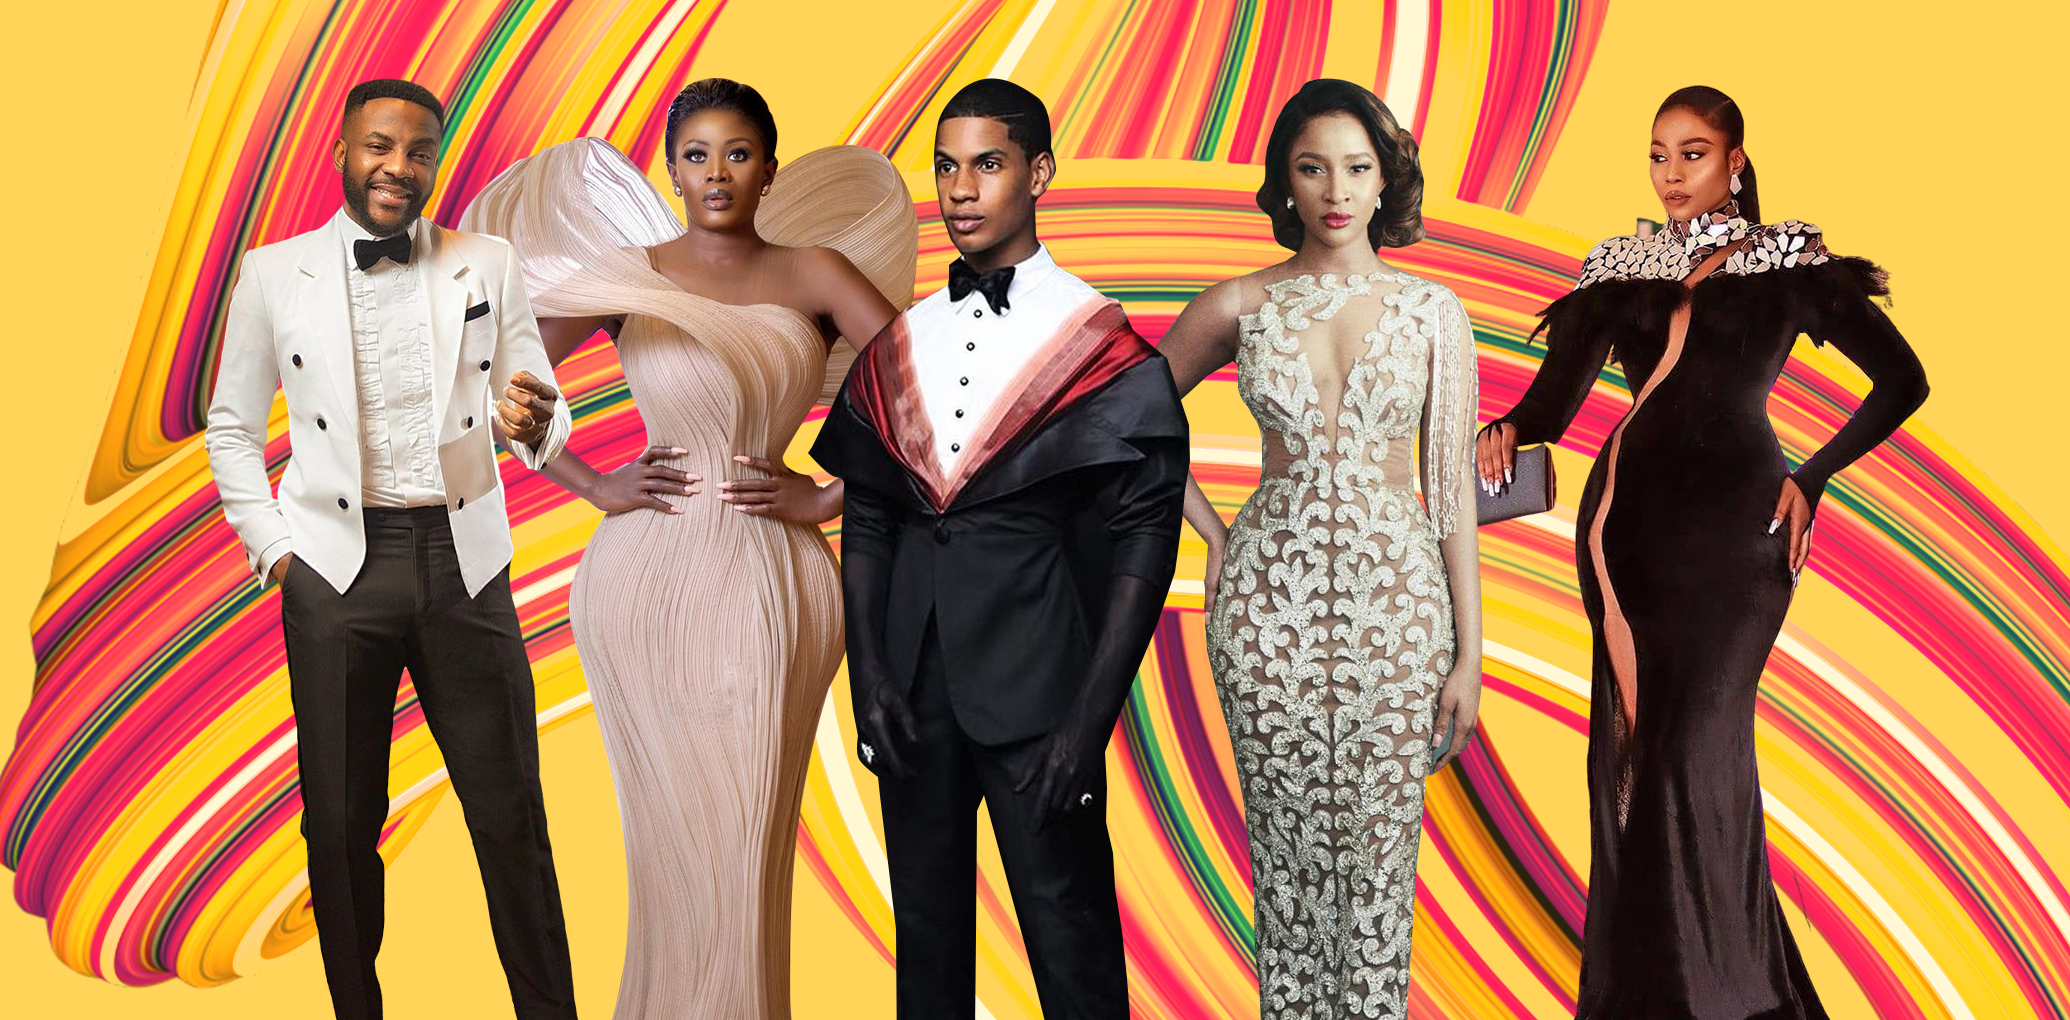 Our Editors’ Top 50 AMVCA Gala Looks from 2013 to Date